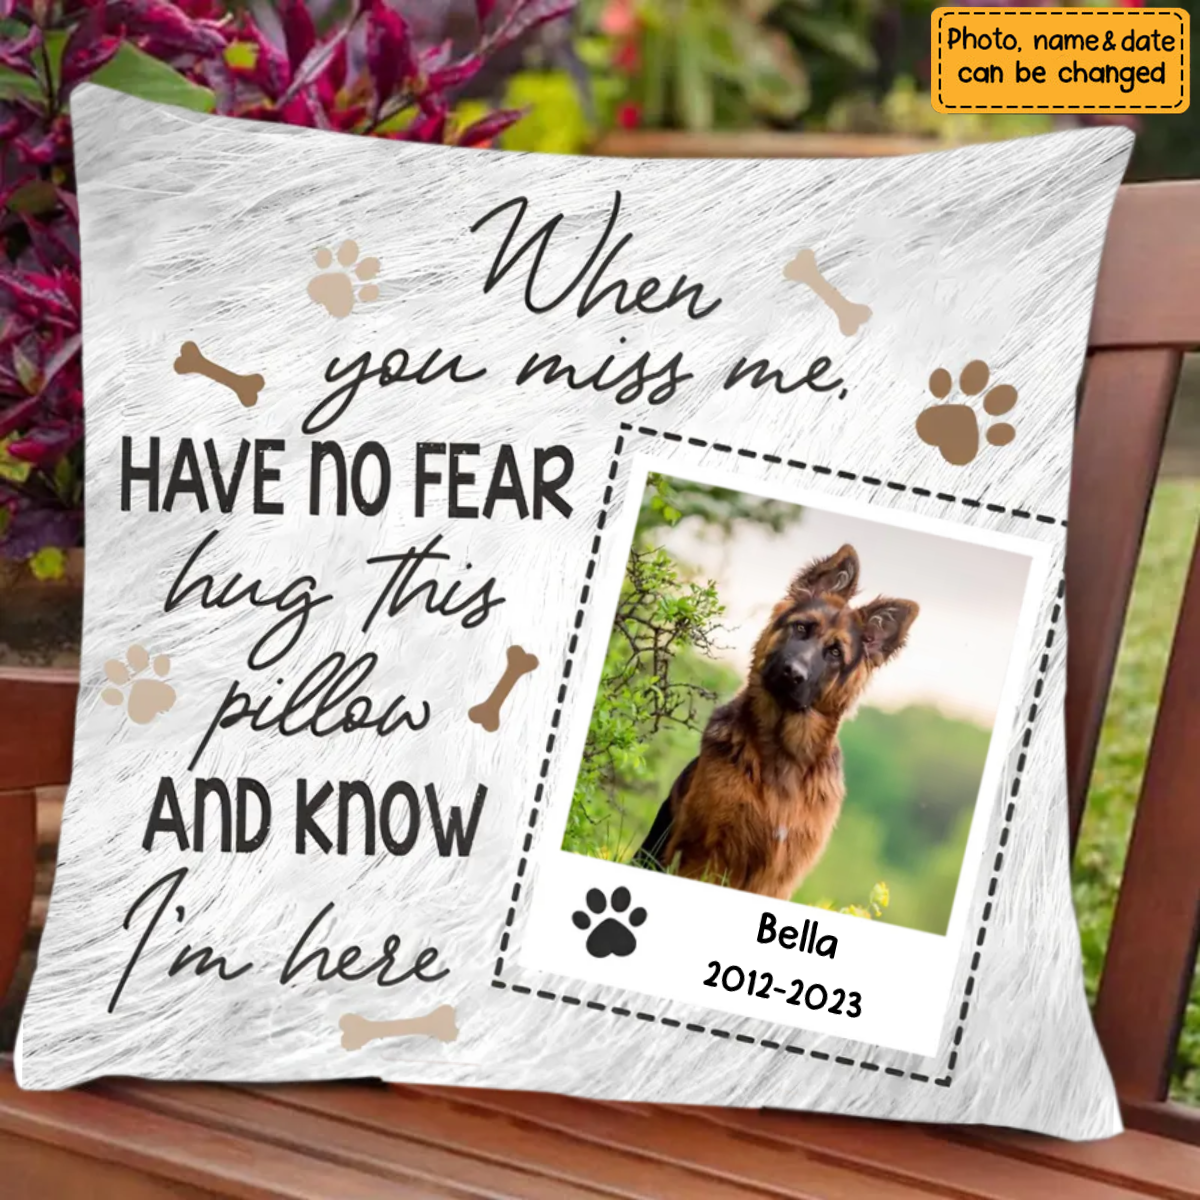 Pet Memorial Photo Pillow, Sympathy Gift For Dog Loss, When You Miss Me Have No Fear Pillow